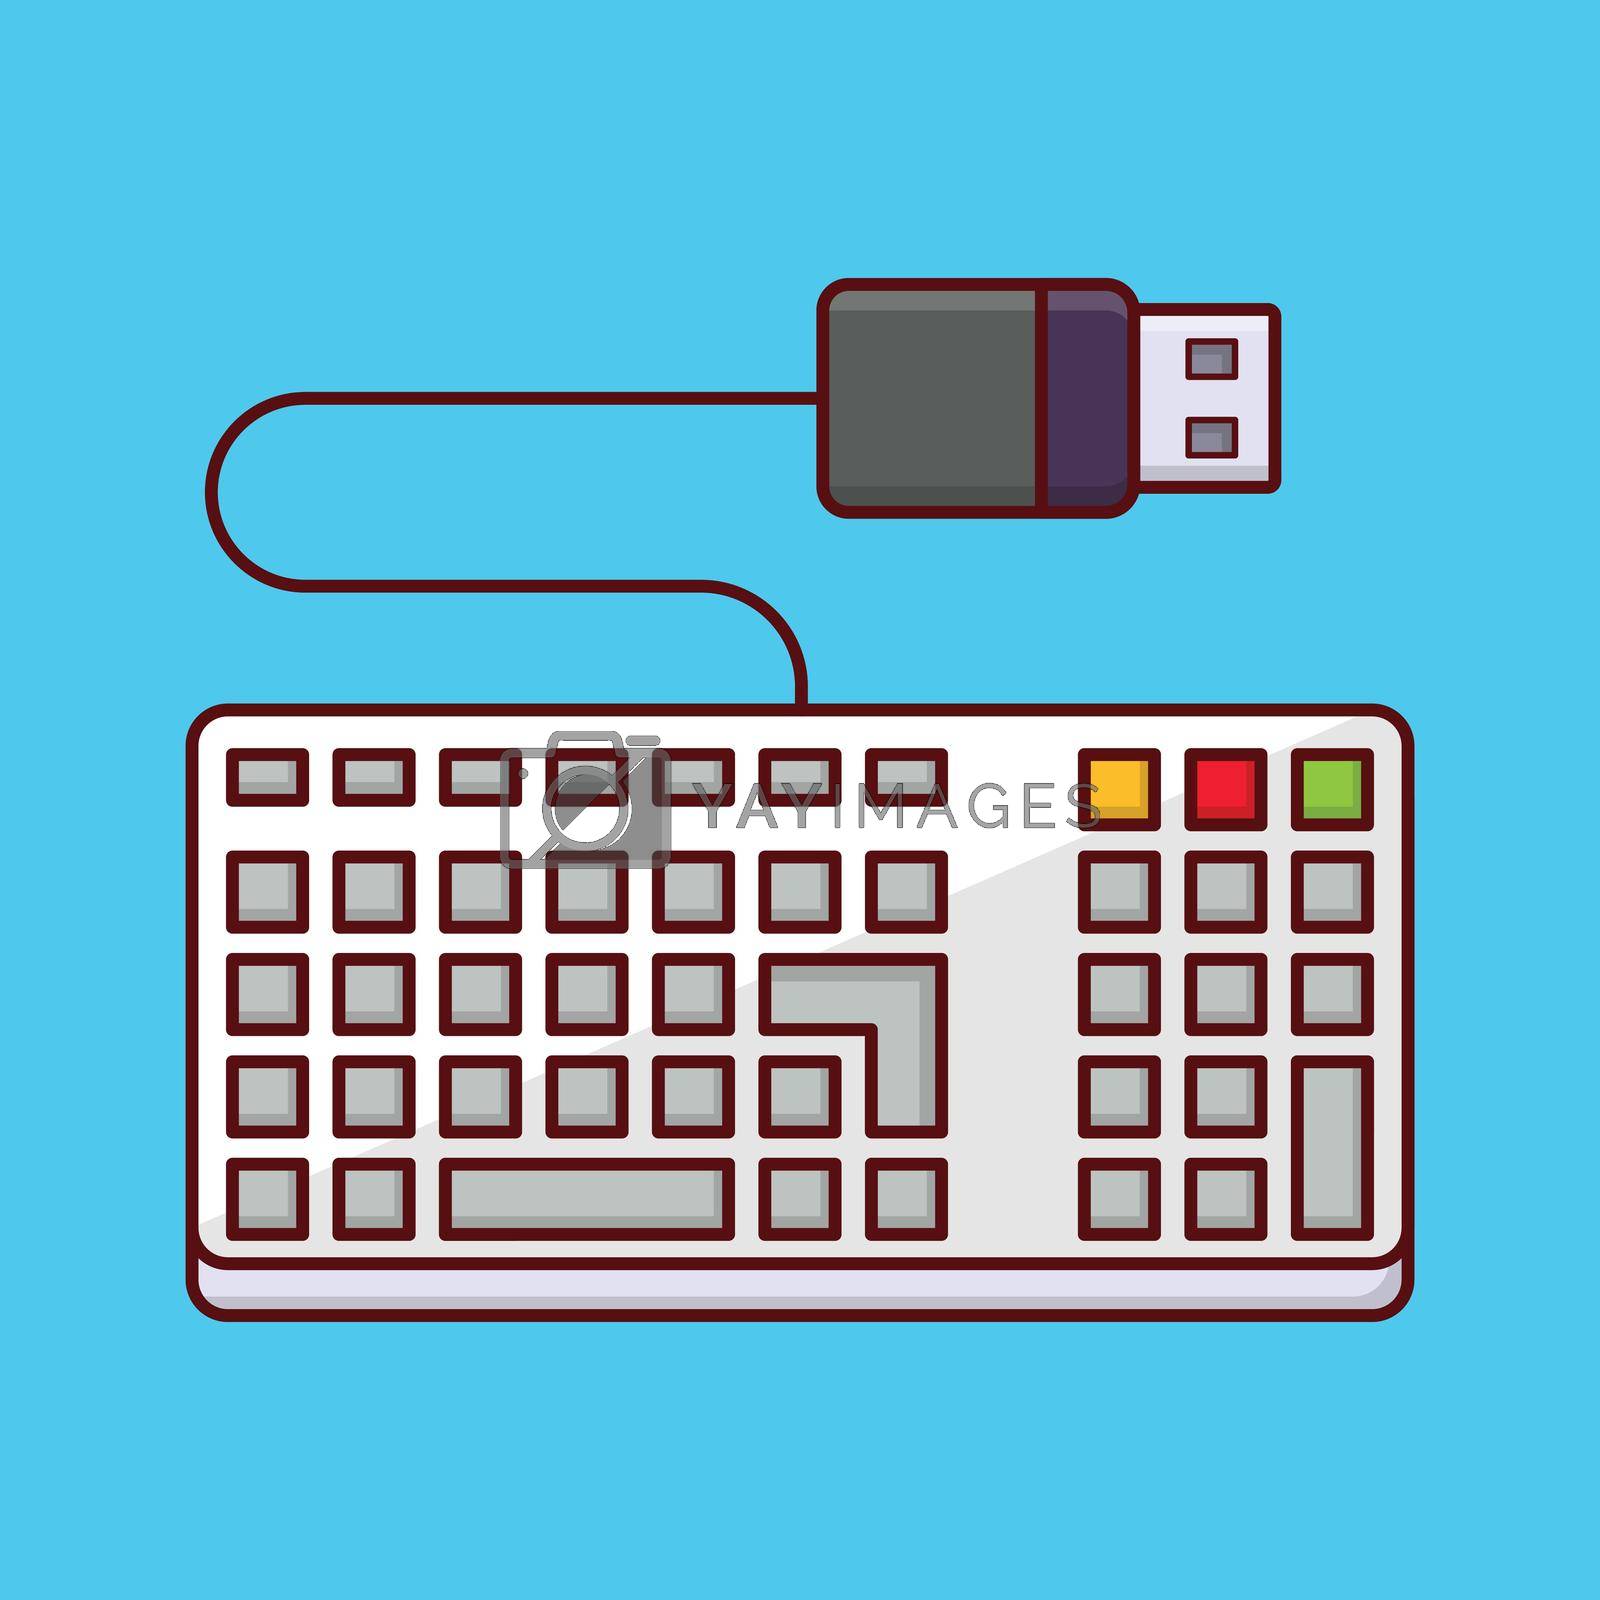 Royalty free image of keyboard by FlaticonsDesign